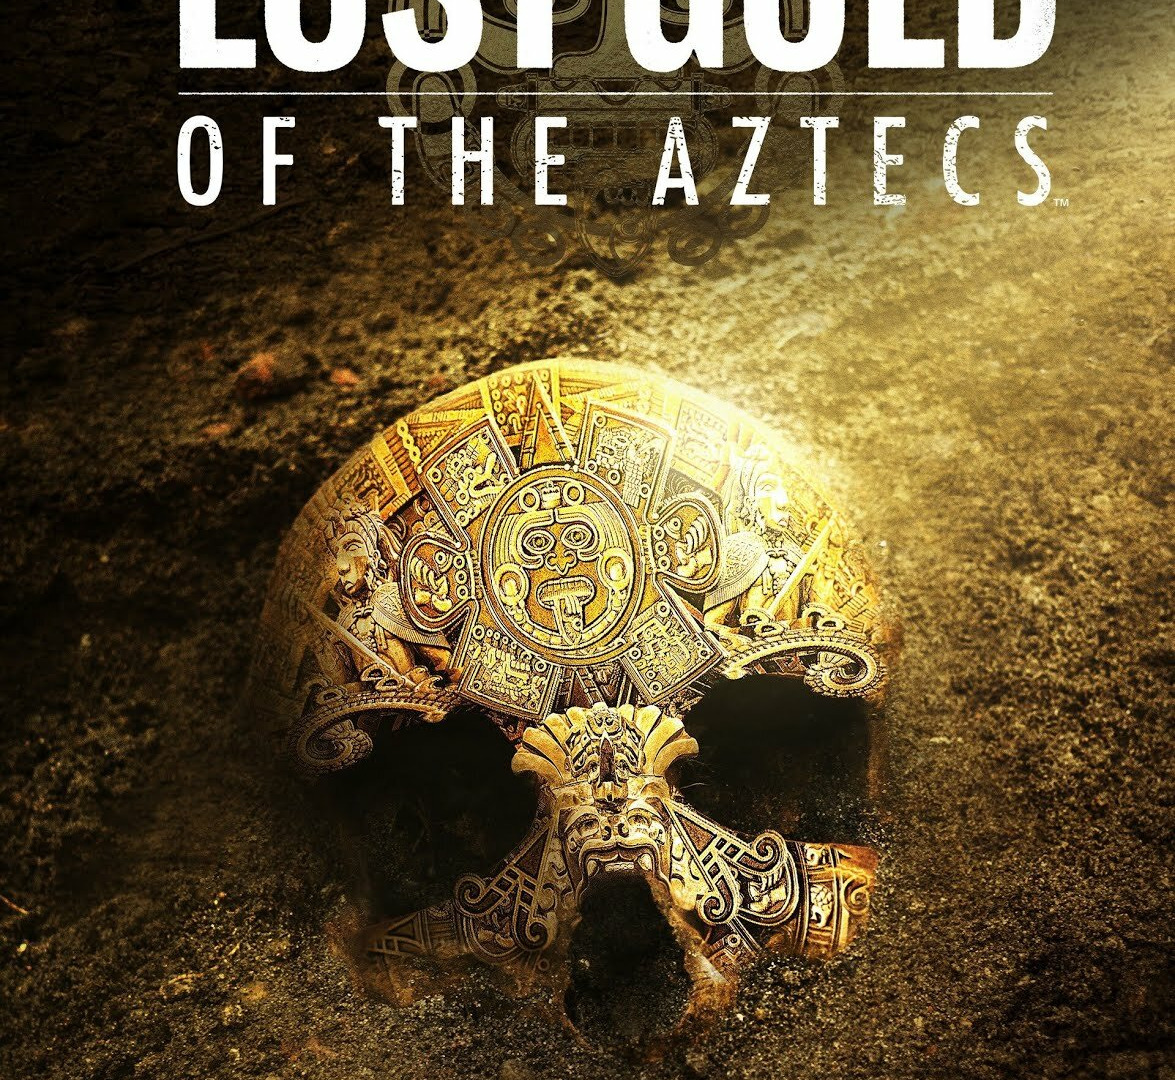 Show Lost Gold of the Aztecs